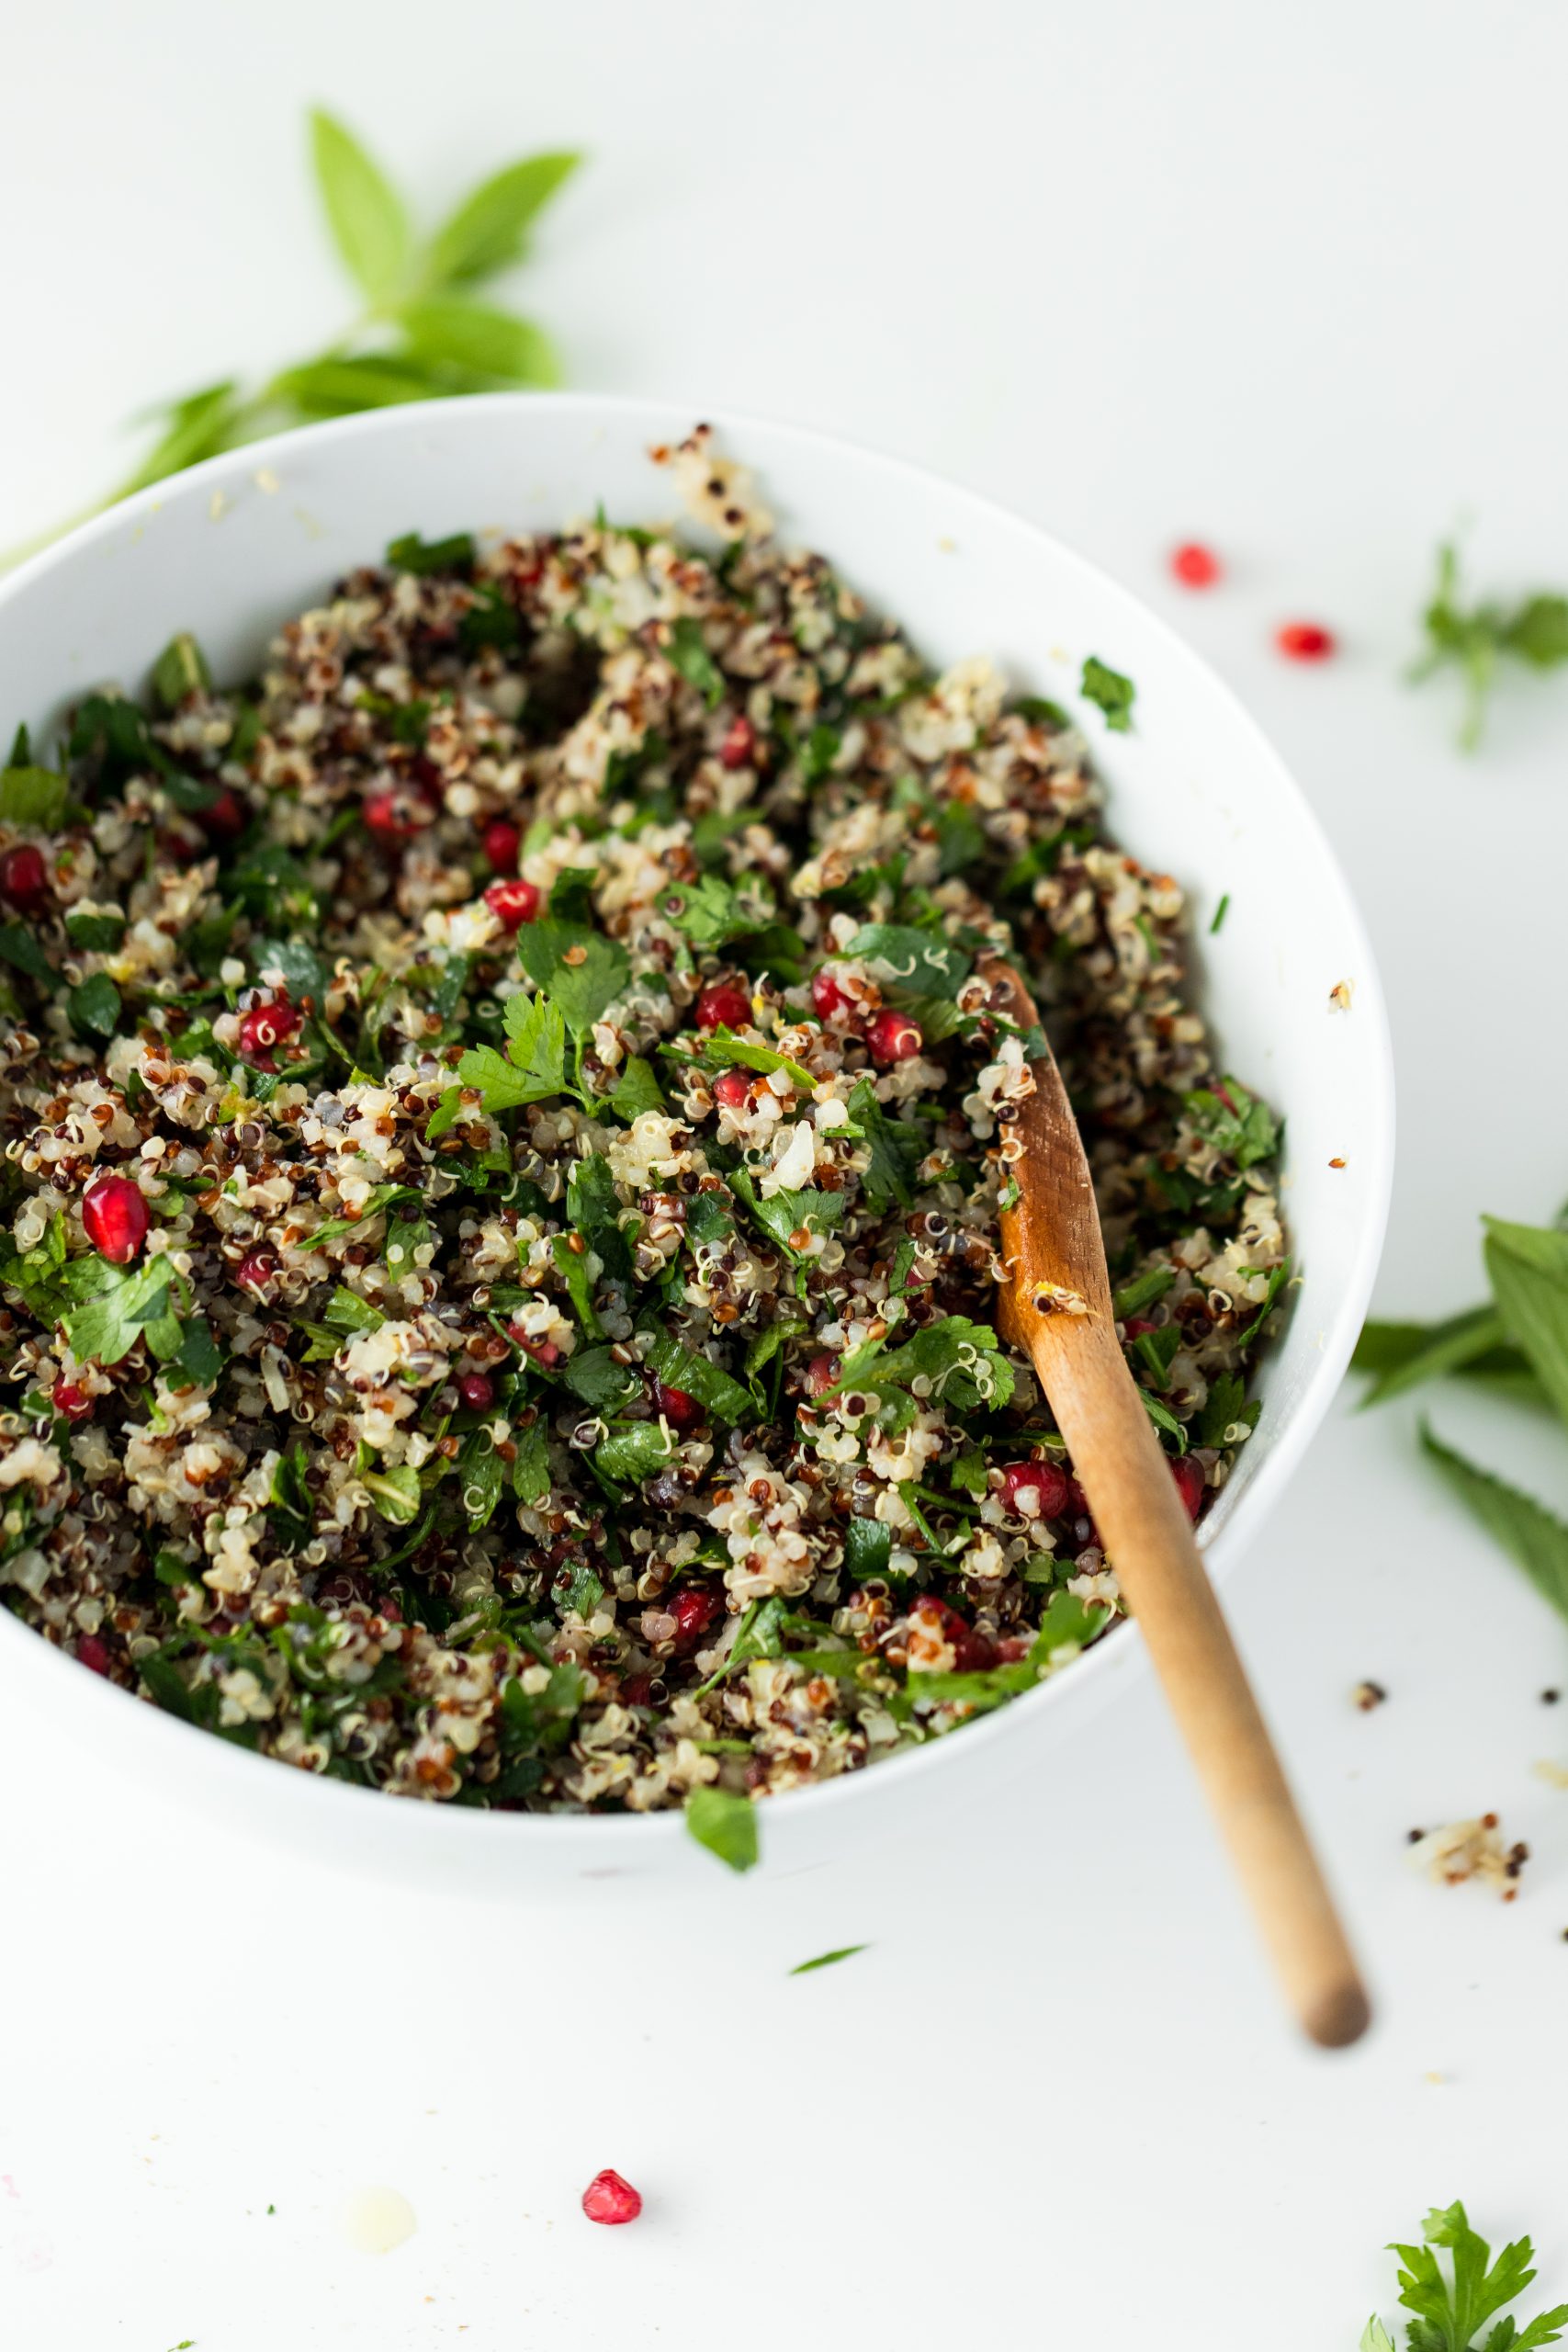 Quinoa Salad with Parsley and Pomegranate Seeds